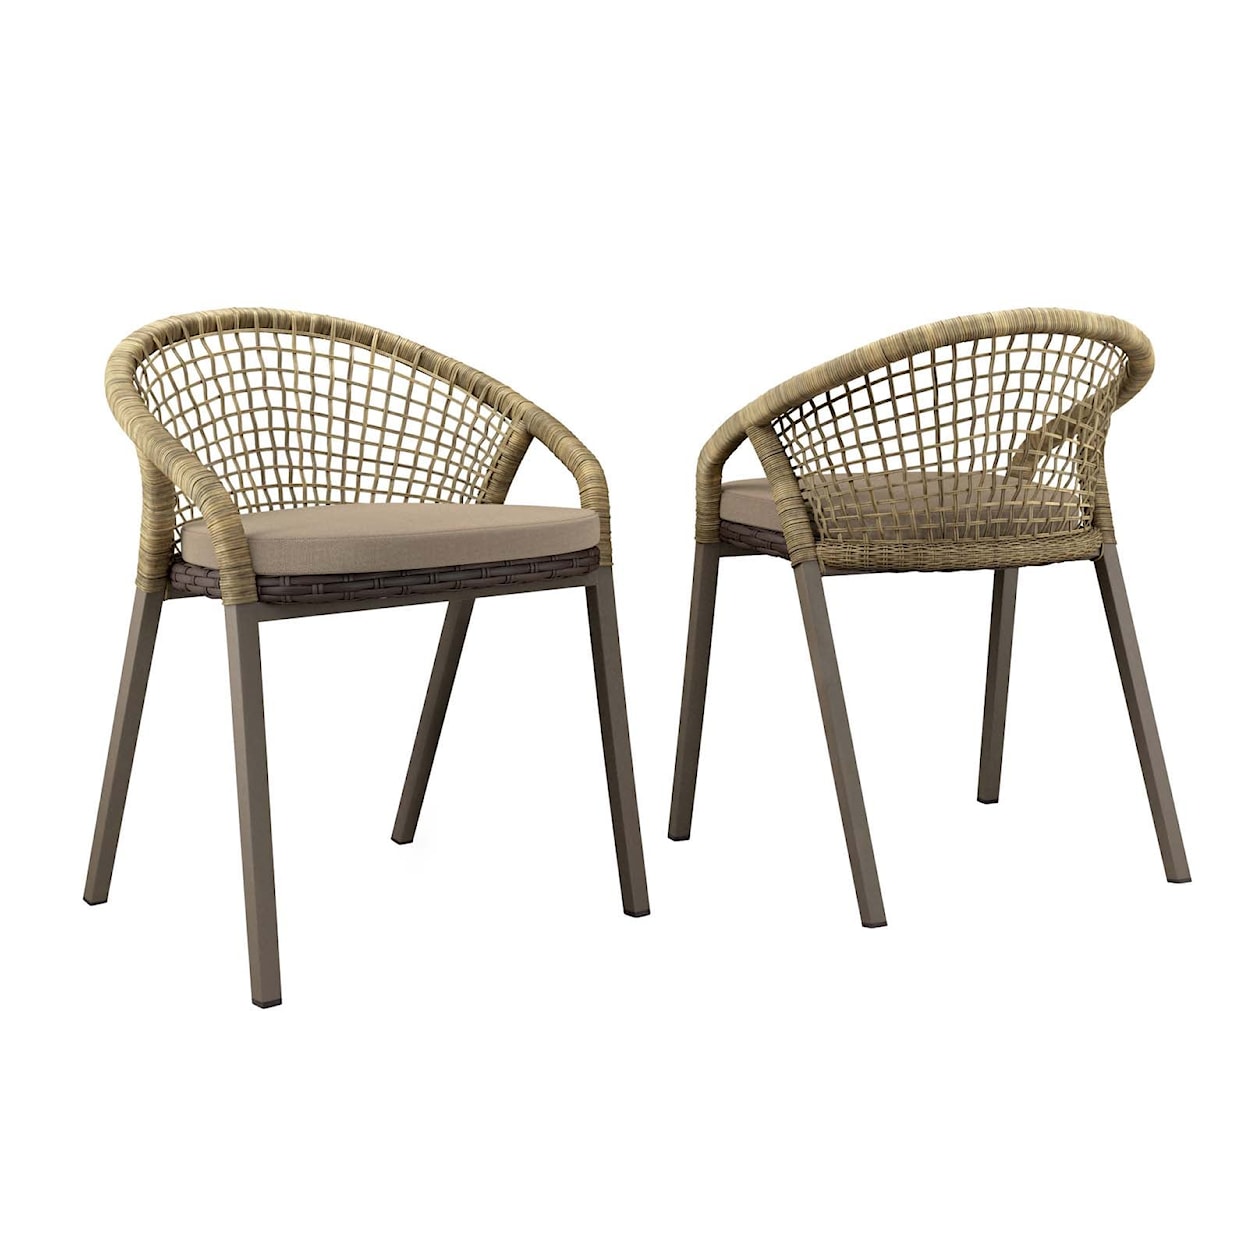 Modway Meadow Meadow Outdoor Patio Dining Chairs Set of 2